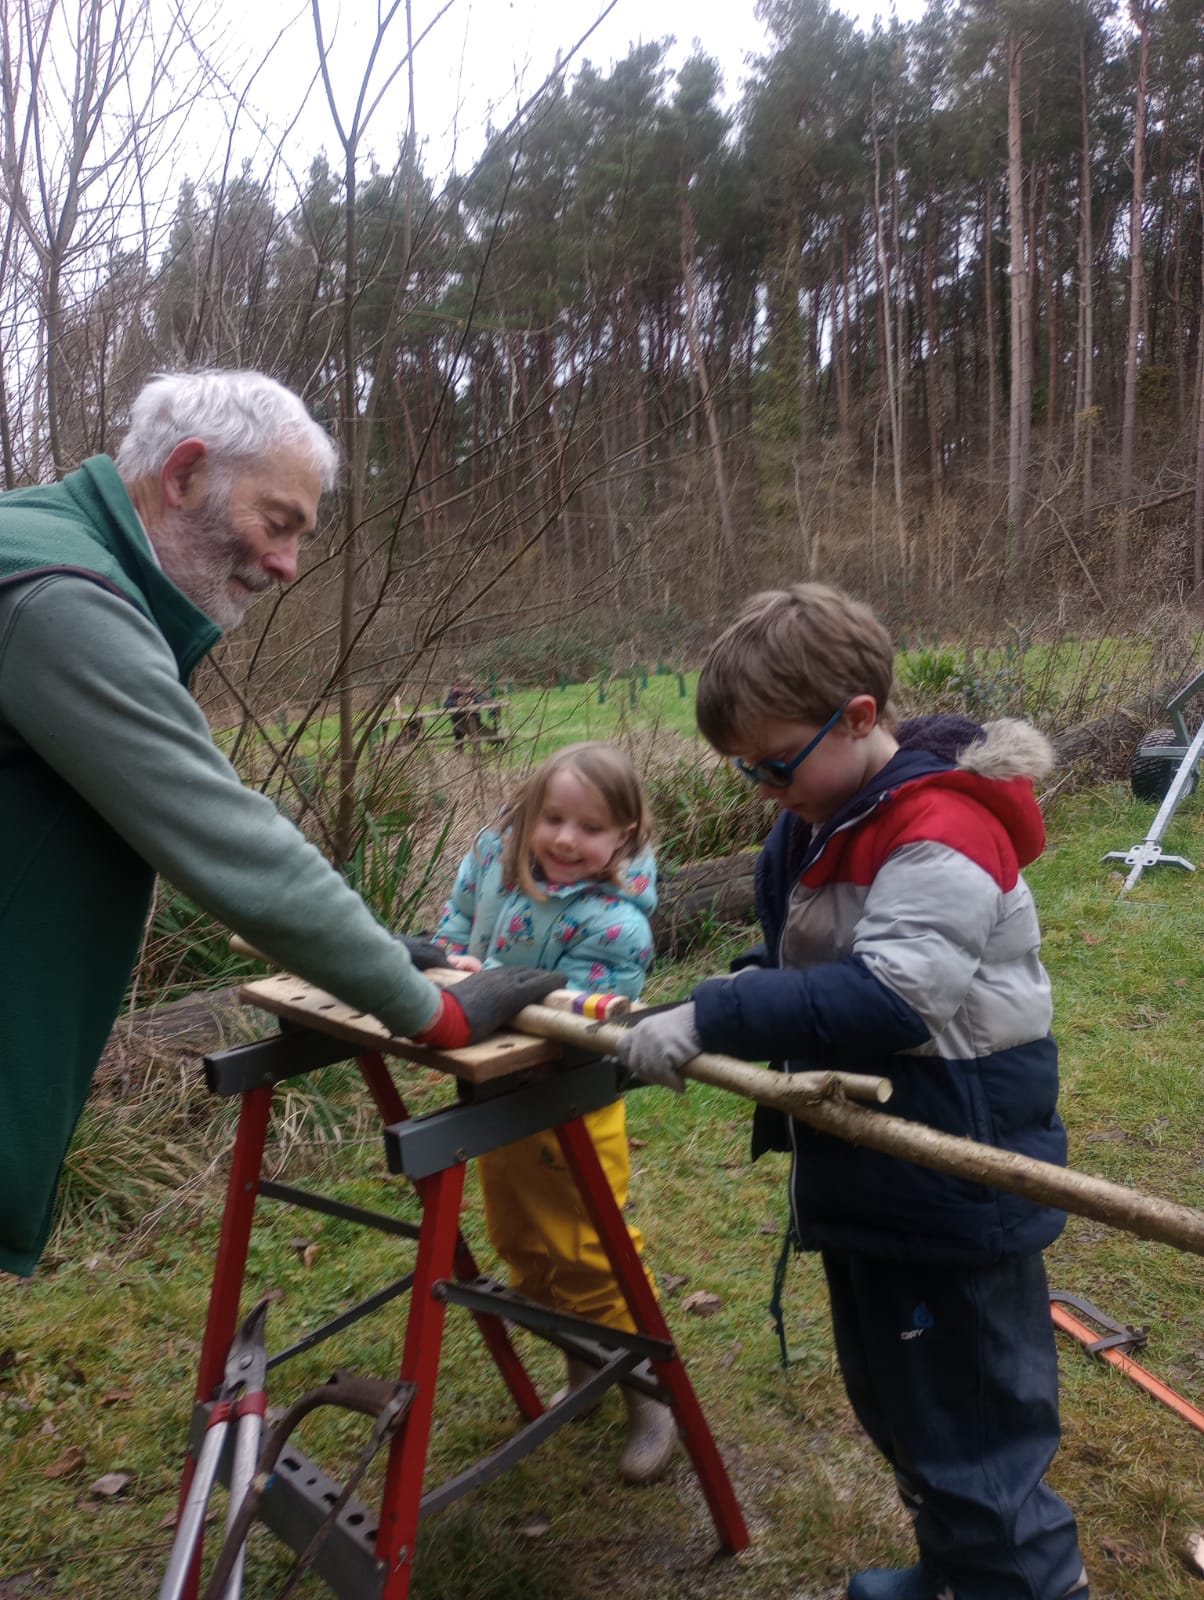 A Brighton Morris member stands in a woodland with two youngsters and a hazel stave on a frame. They are measuring the stave and cutting it to make it the correct length for Morris dancing.